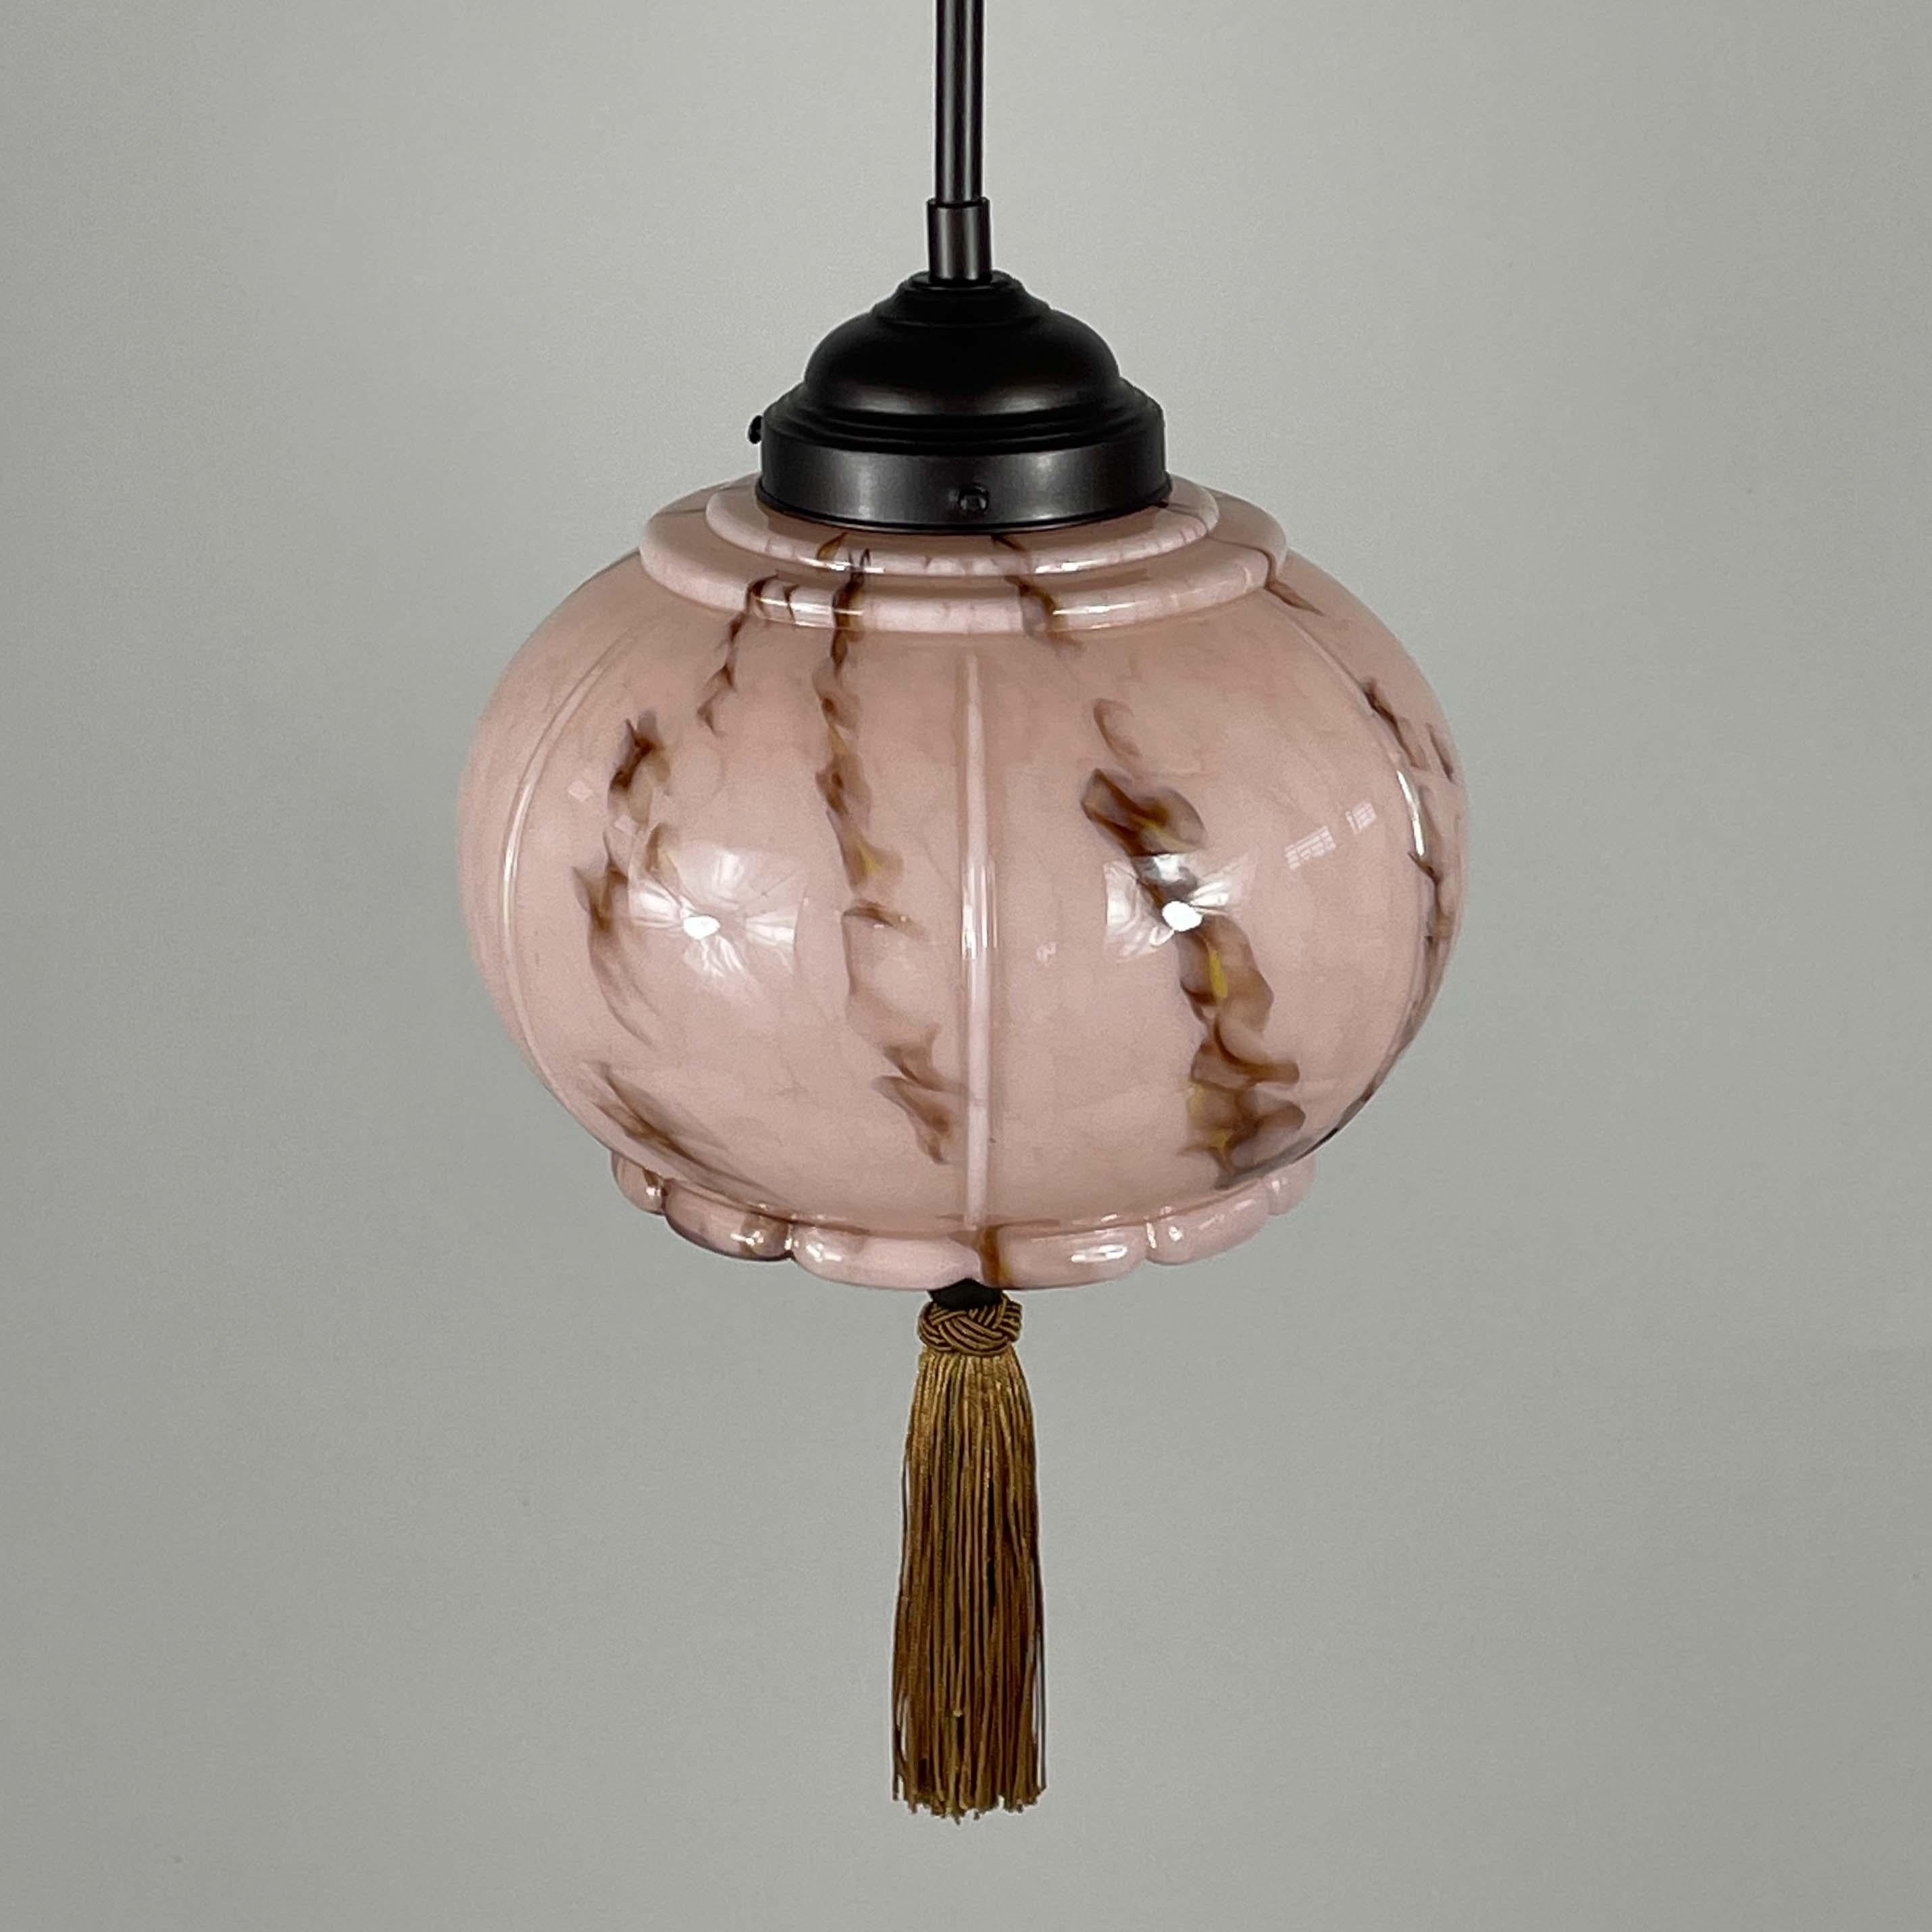 Marbled Pale Rose Opaline & Bronzed Pendant with Tassel, Germany 1920s 1930s For Sale 3